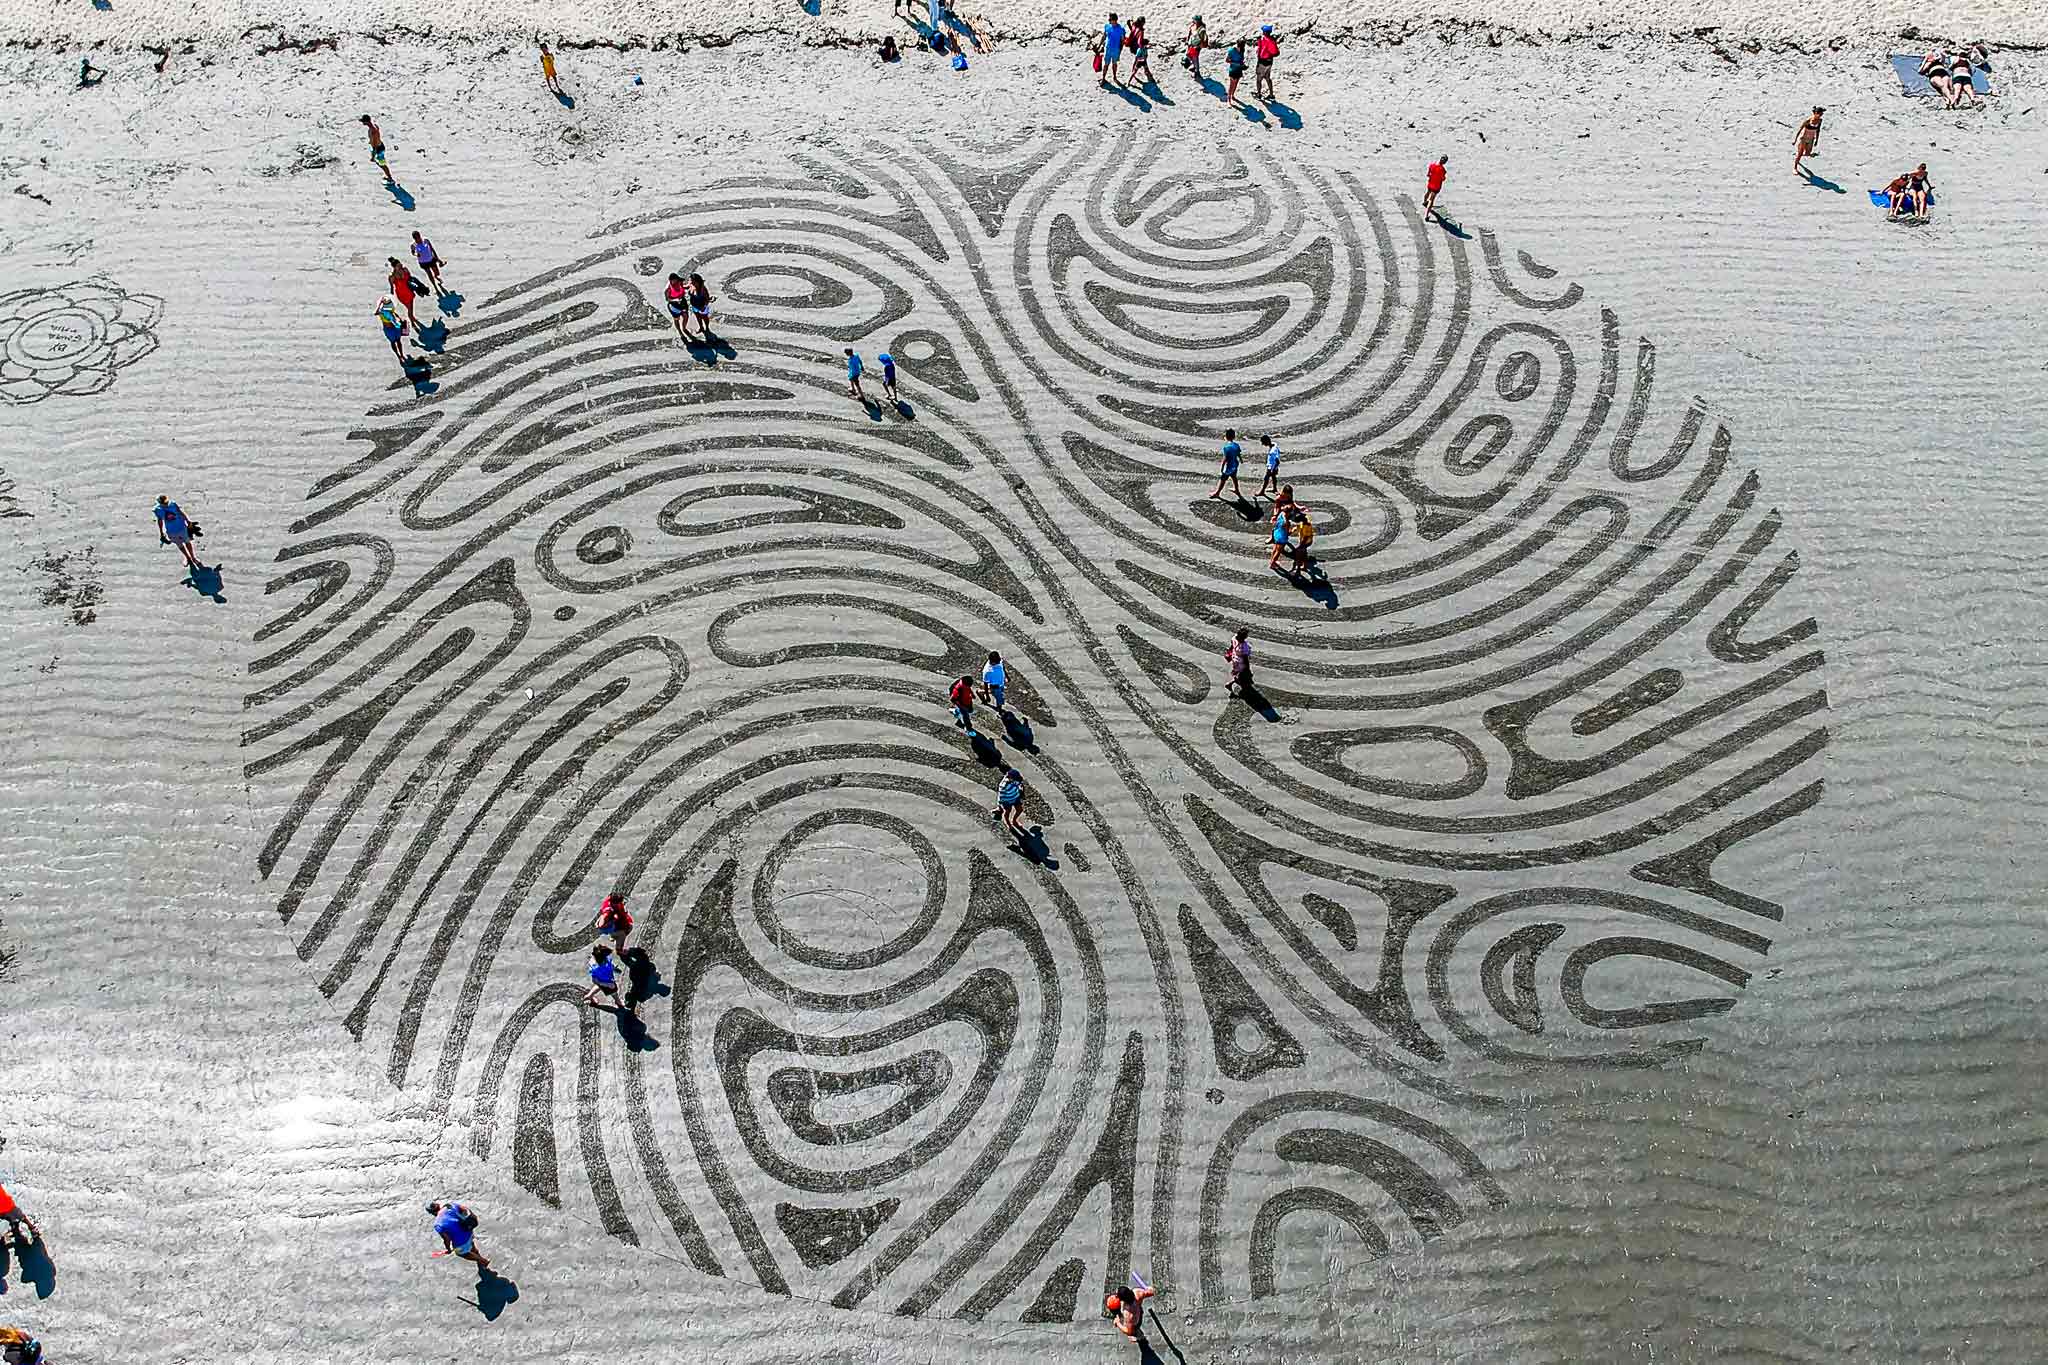 32 incredible sand masterpieces from a San Francisco native